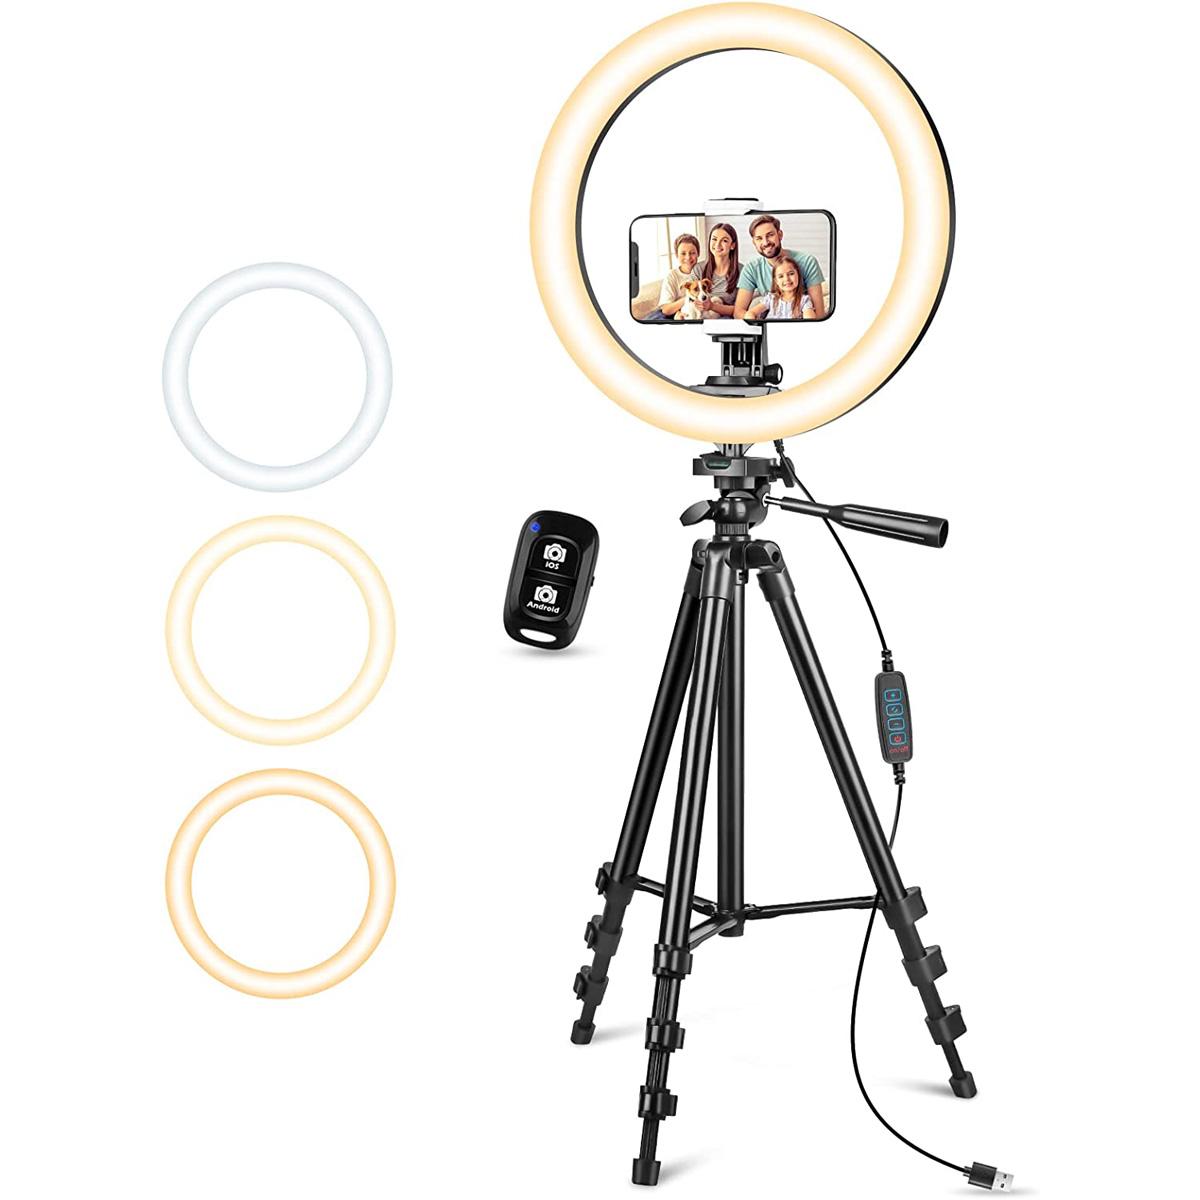 Aureday 12in Dimmable Ring Light with Stand for $9.99